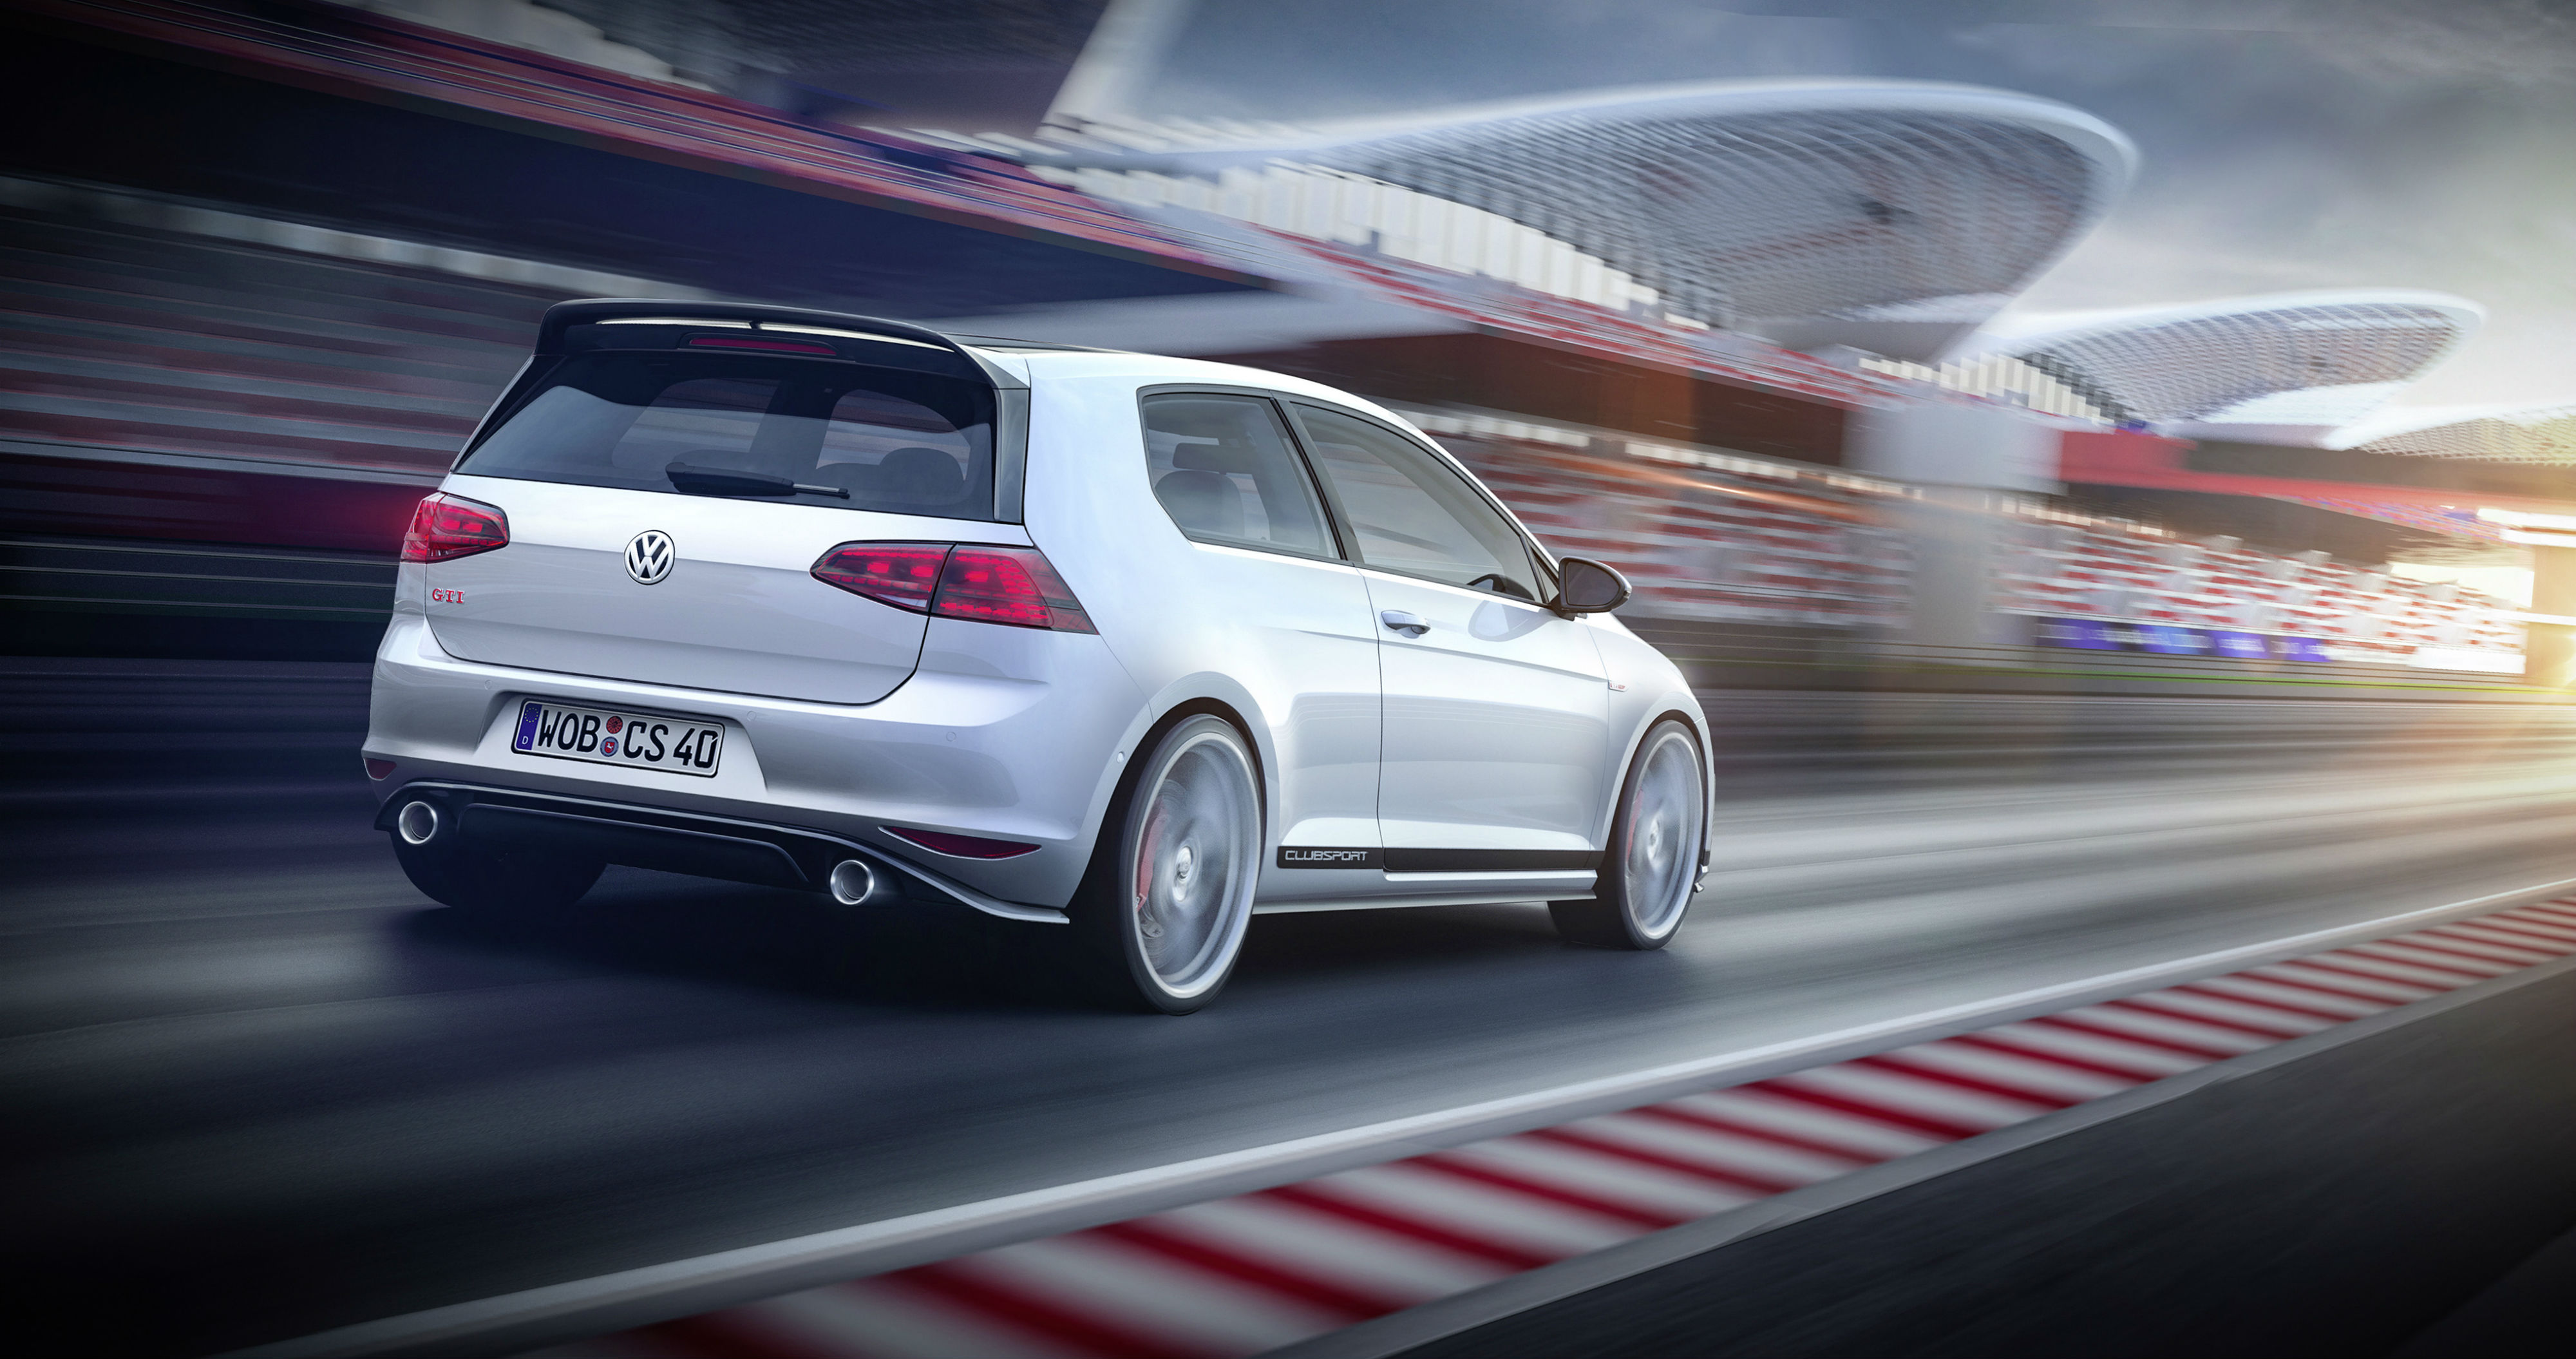 Volkswagen Golf GTI Clubsport will have up to 287bhp